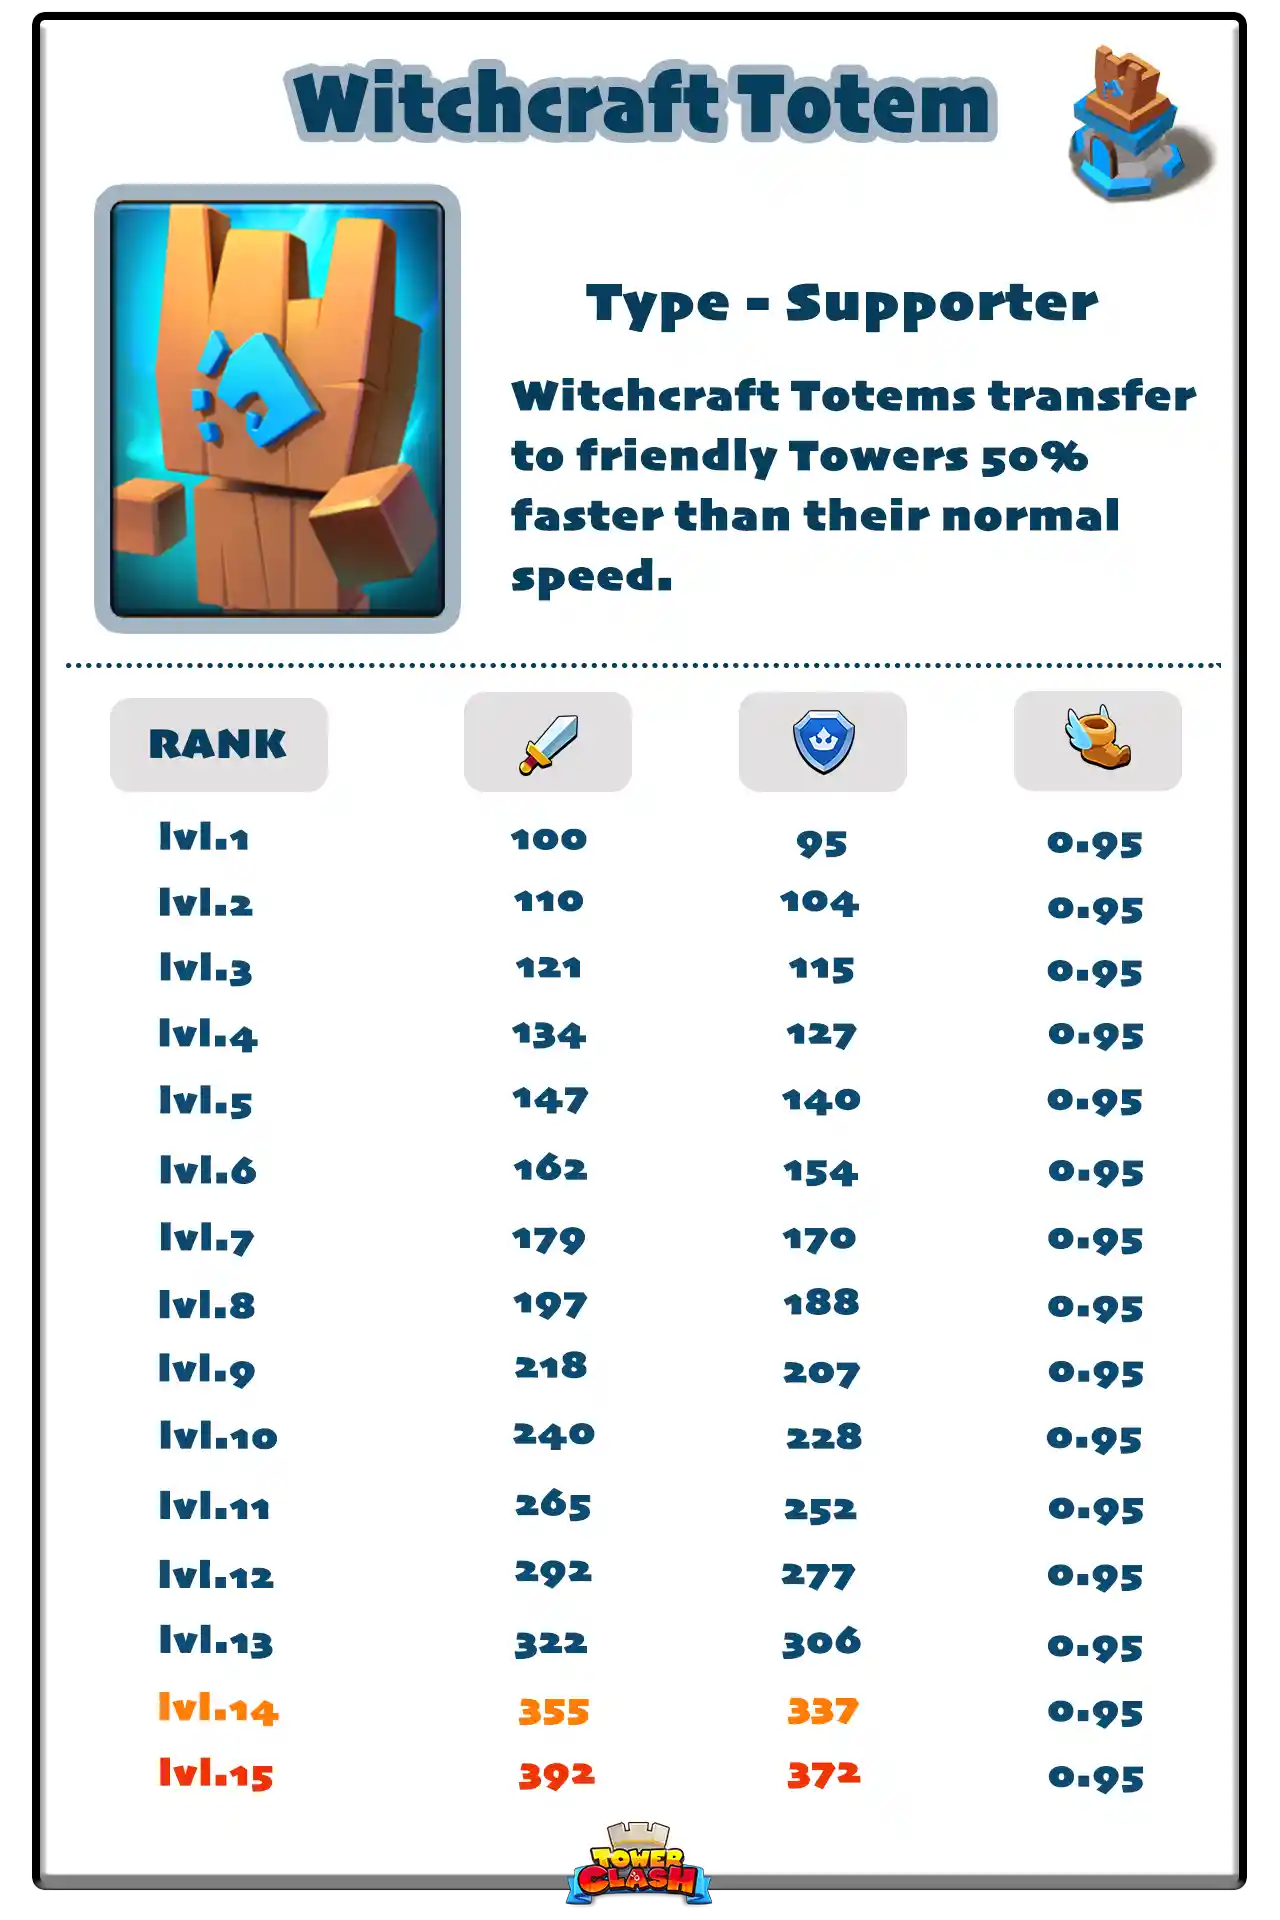 Witchcraft_Totem.png